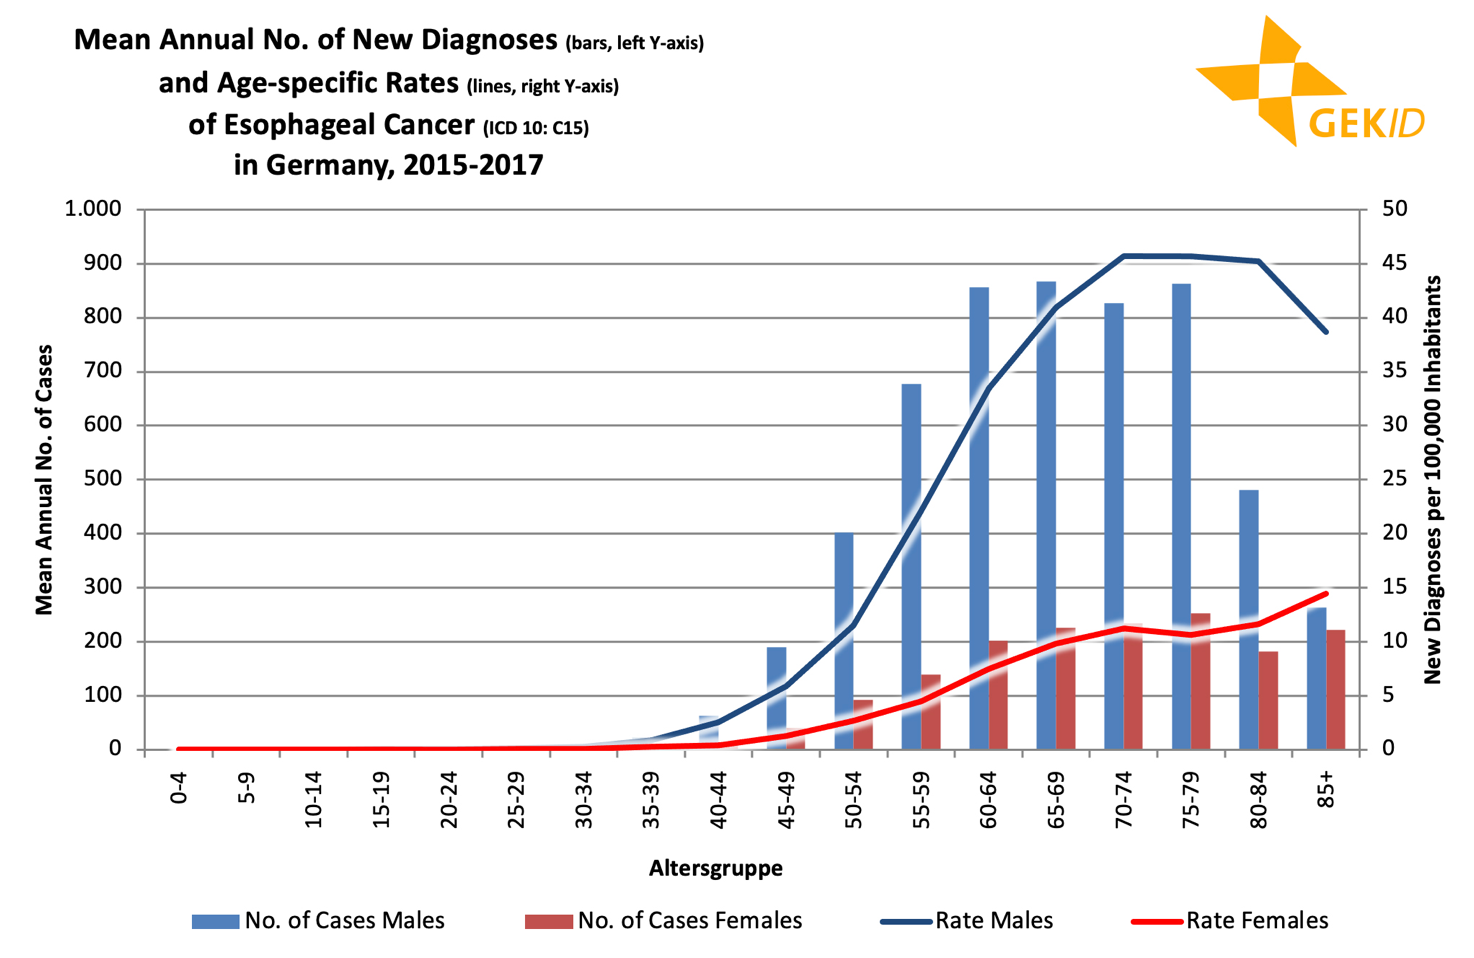 New cases and age-specific rates of esophageal cancer (ICD 10: C15) in Germany